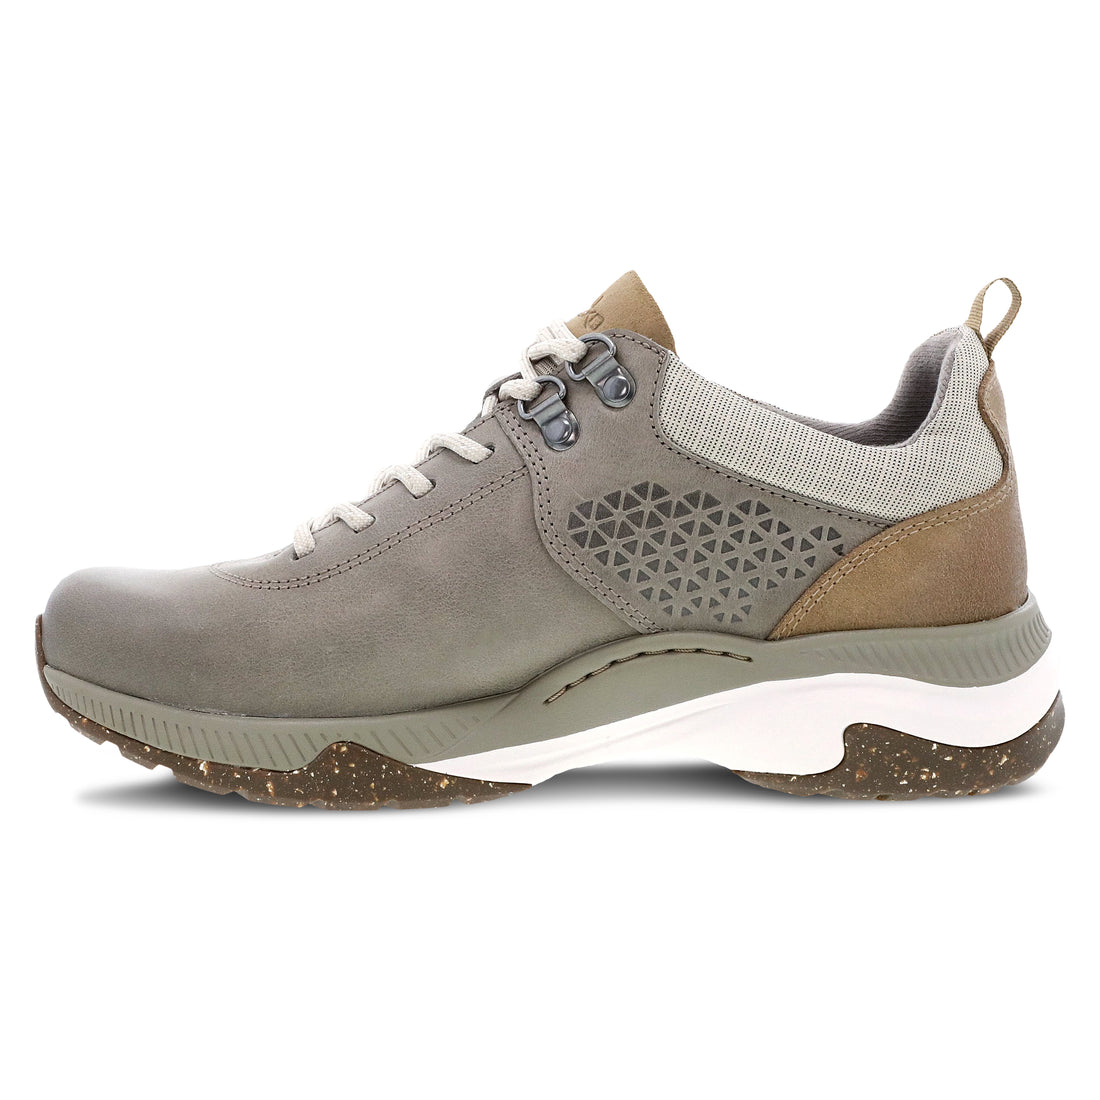 Mary Taupe Waterproof Burnished Sneaker